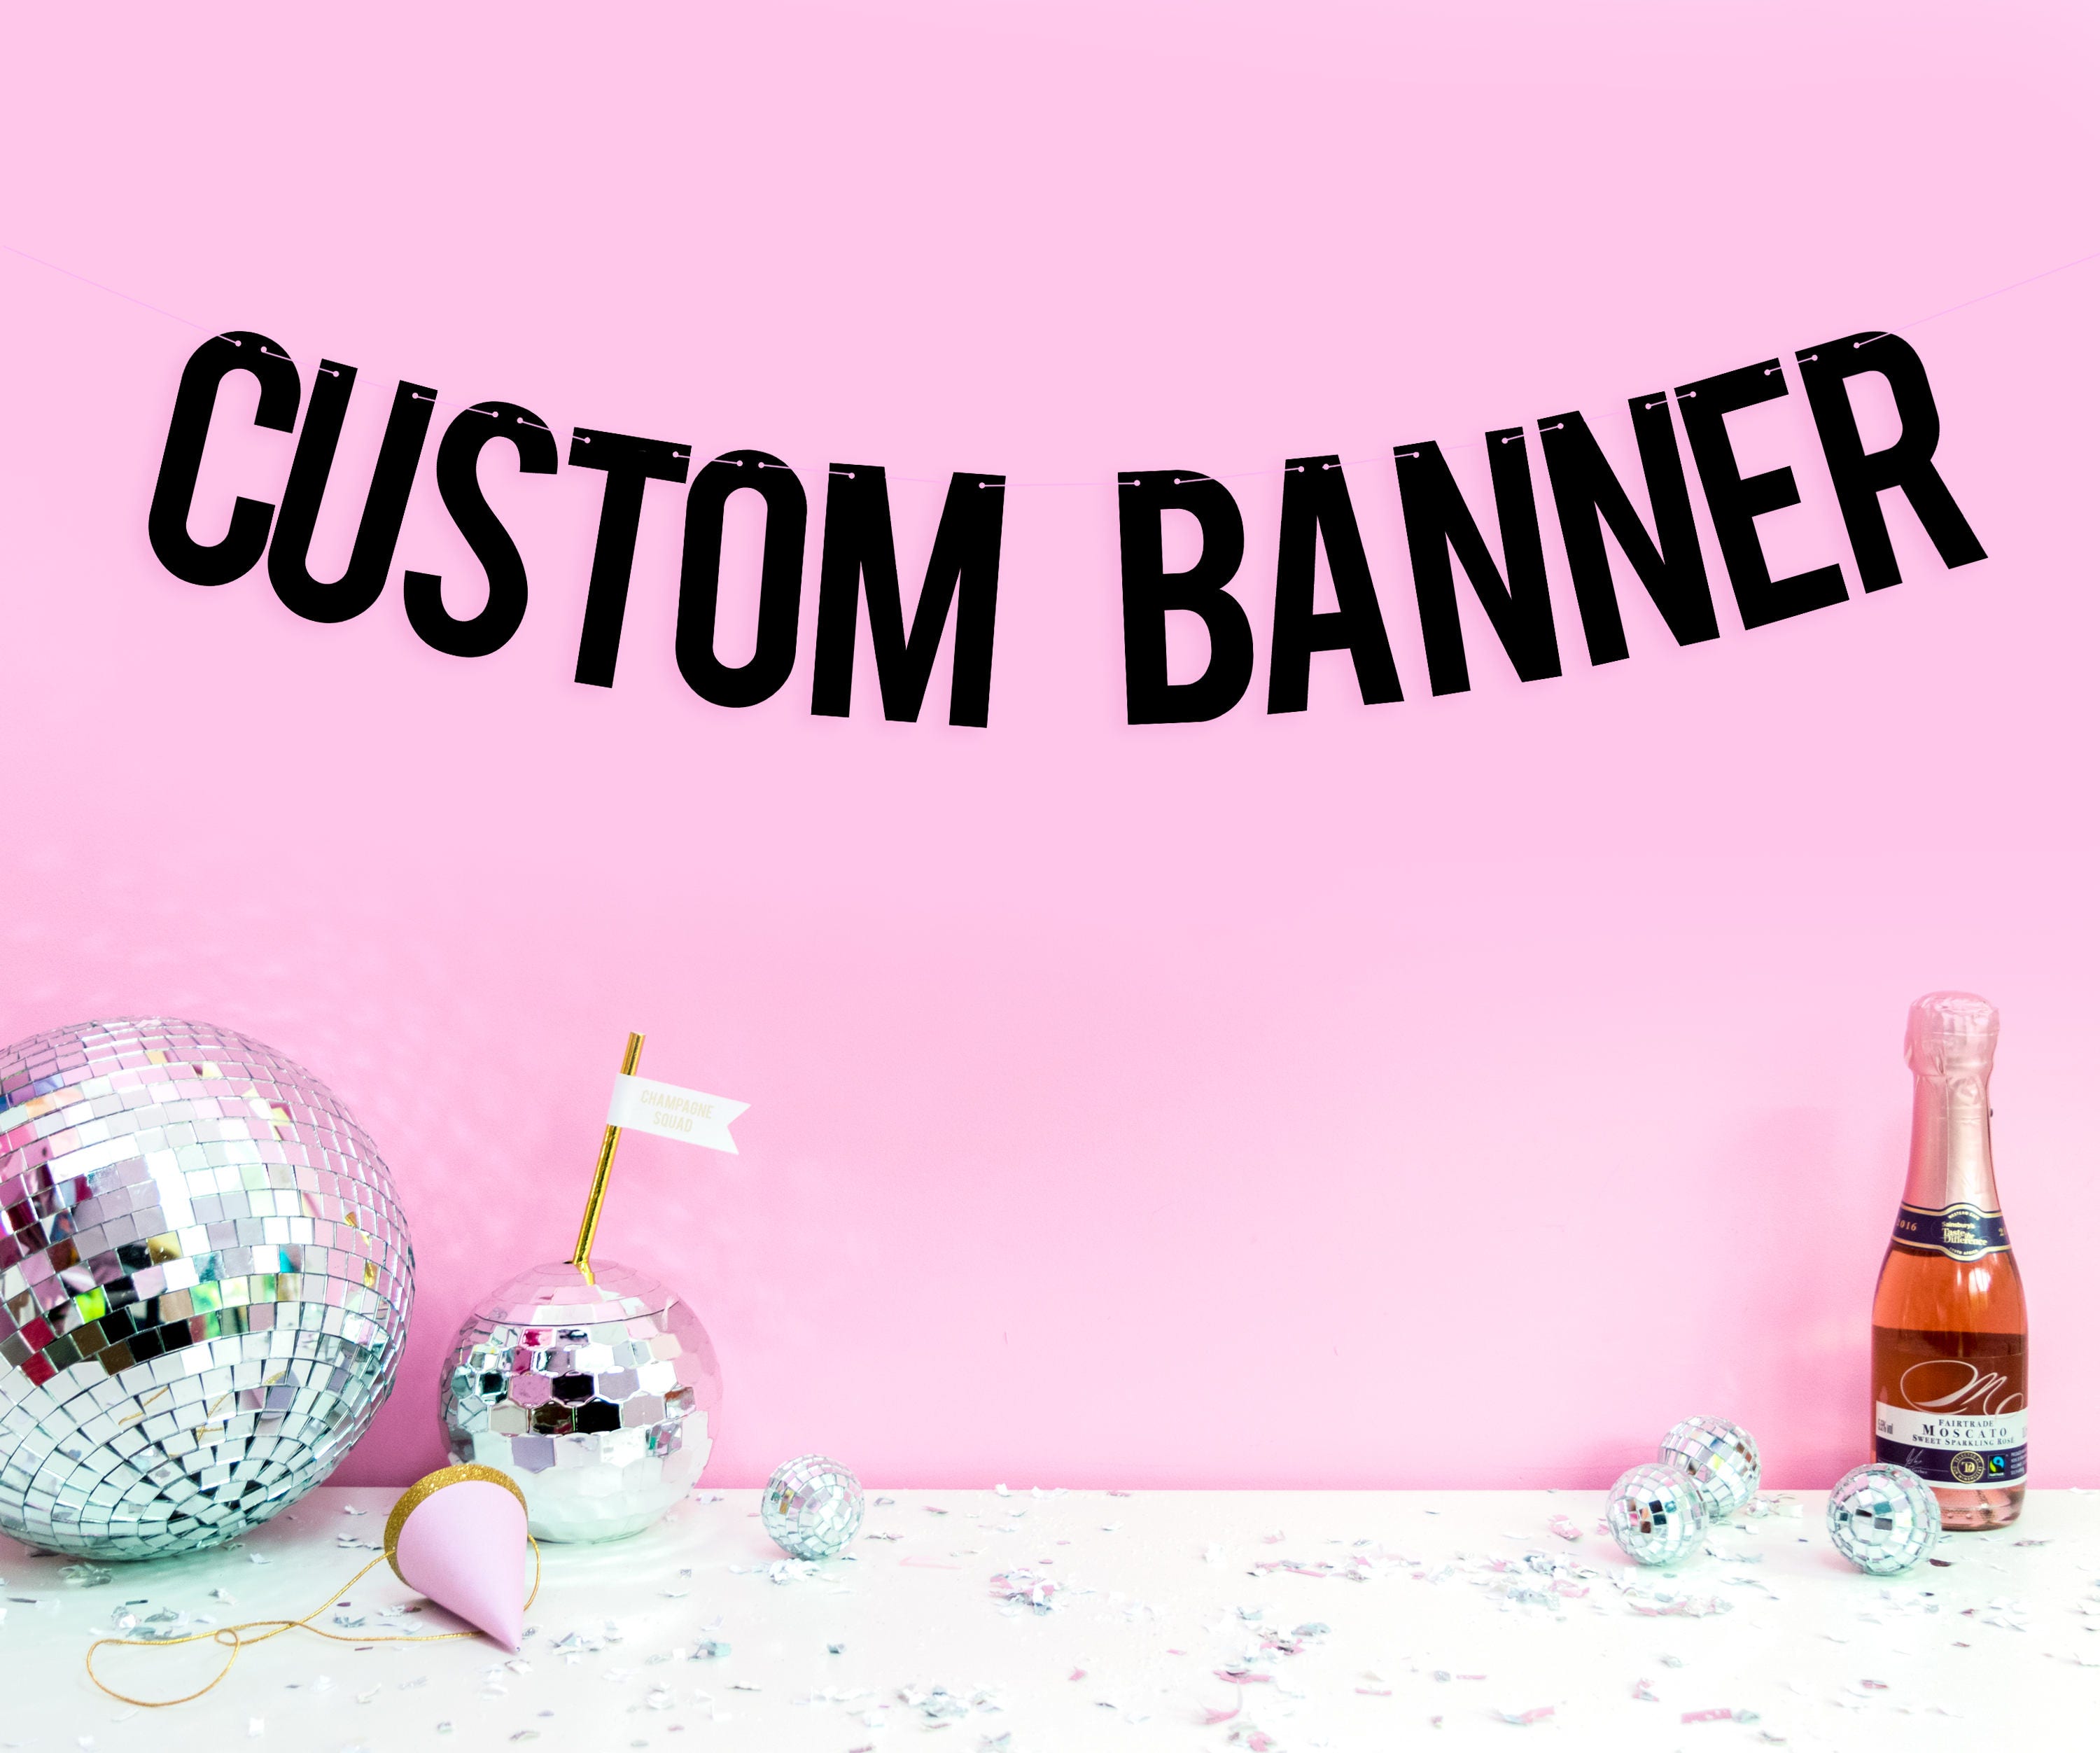 Personalised banners uk